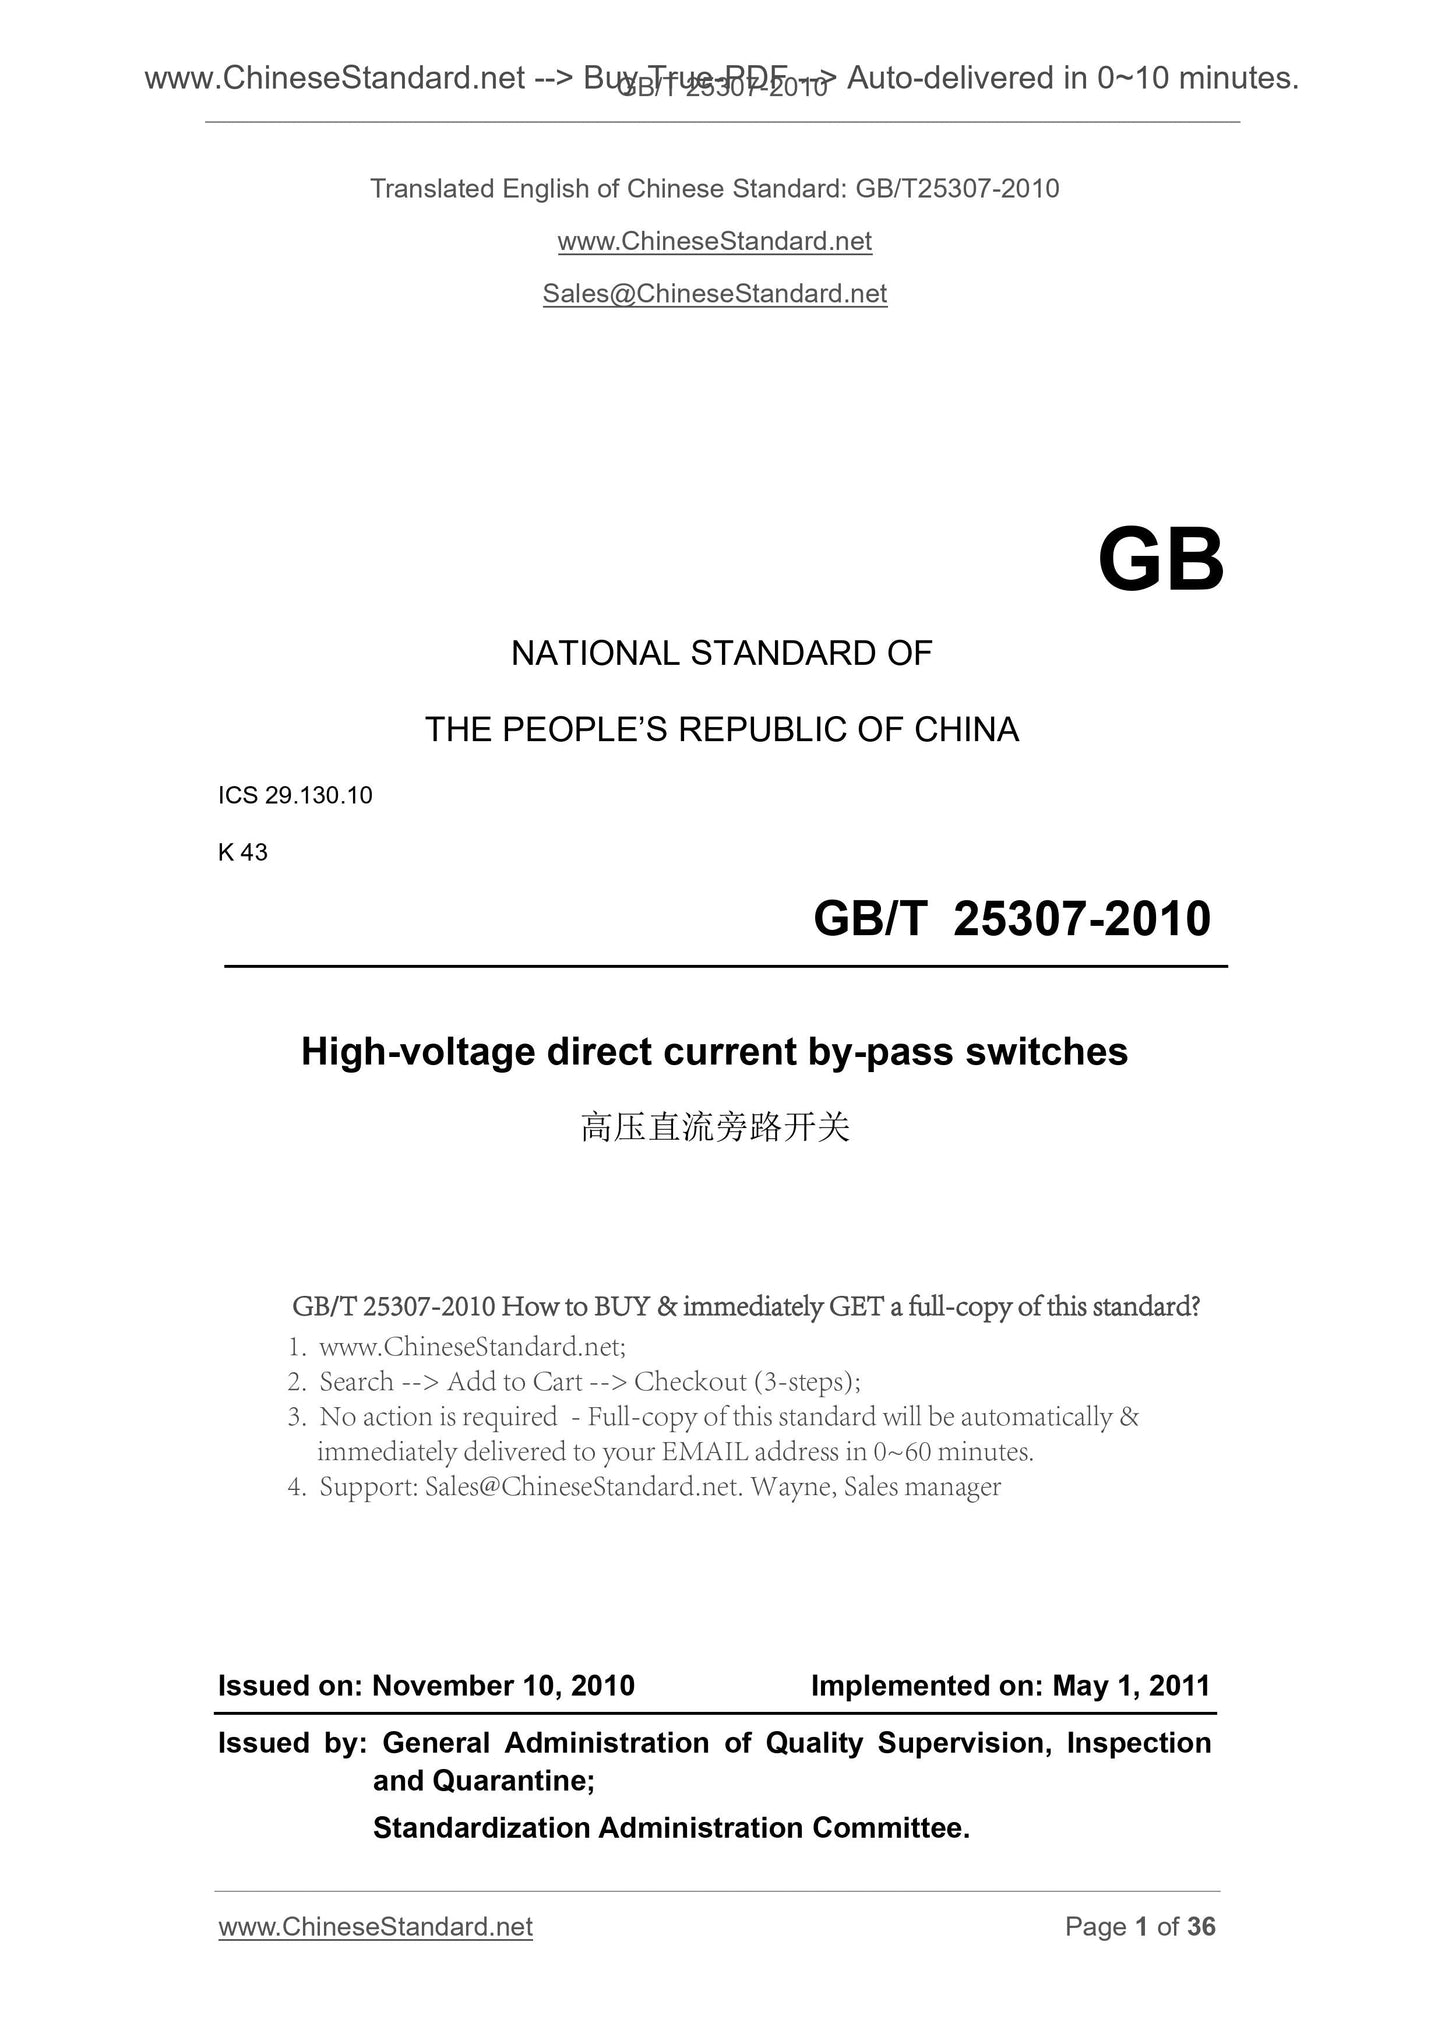 GB/T 25307-2010 Page 1